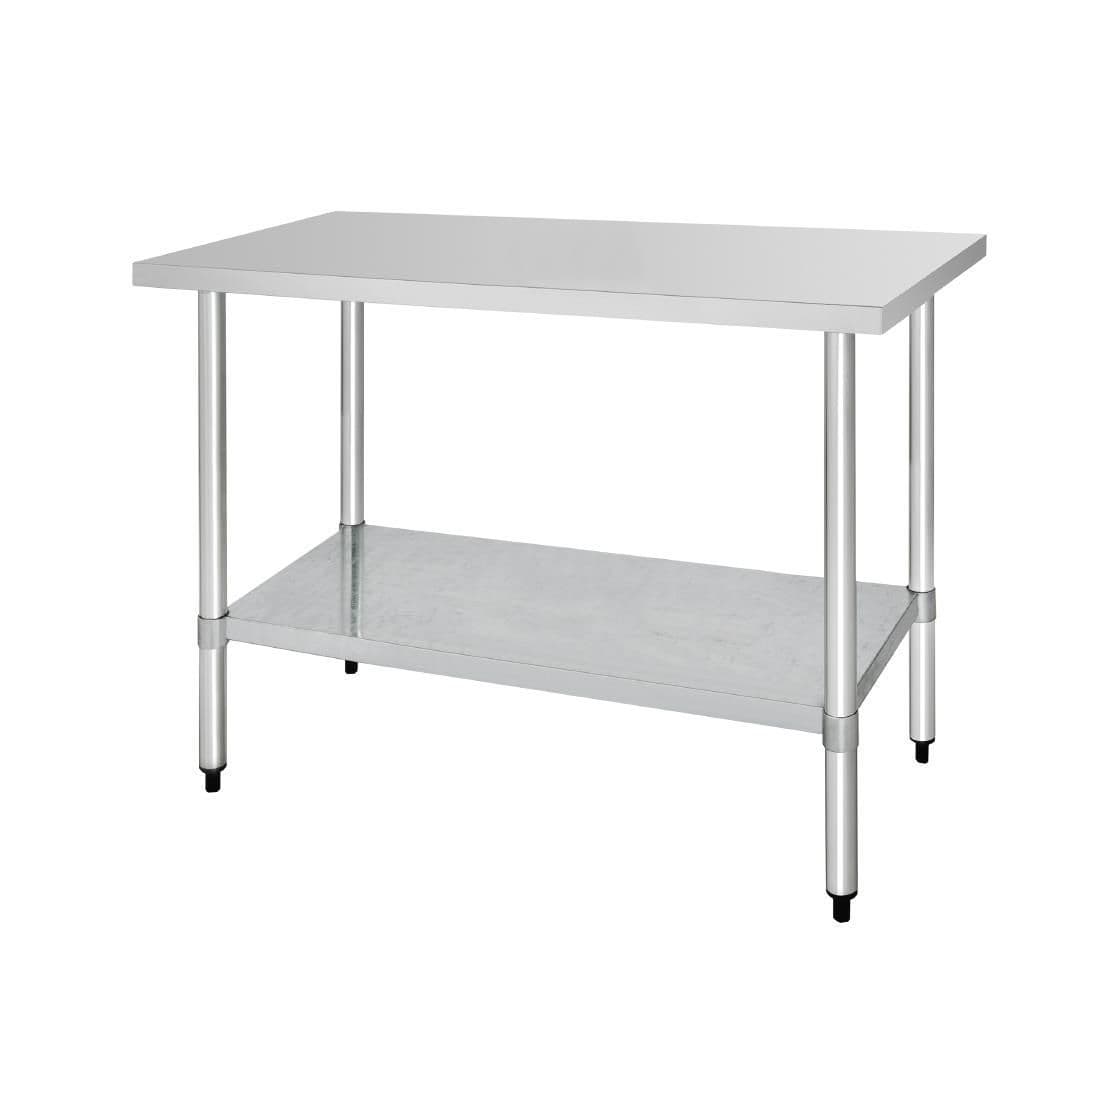 GJ503 Vogue Stainless Steel Prep Table 1500mm JD Catering Equipment Solutions Ltd